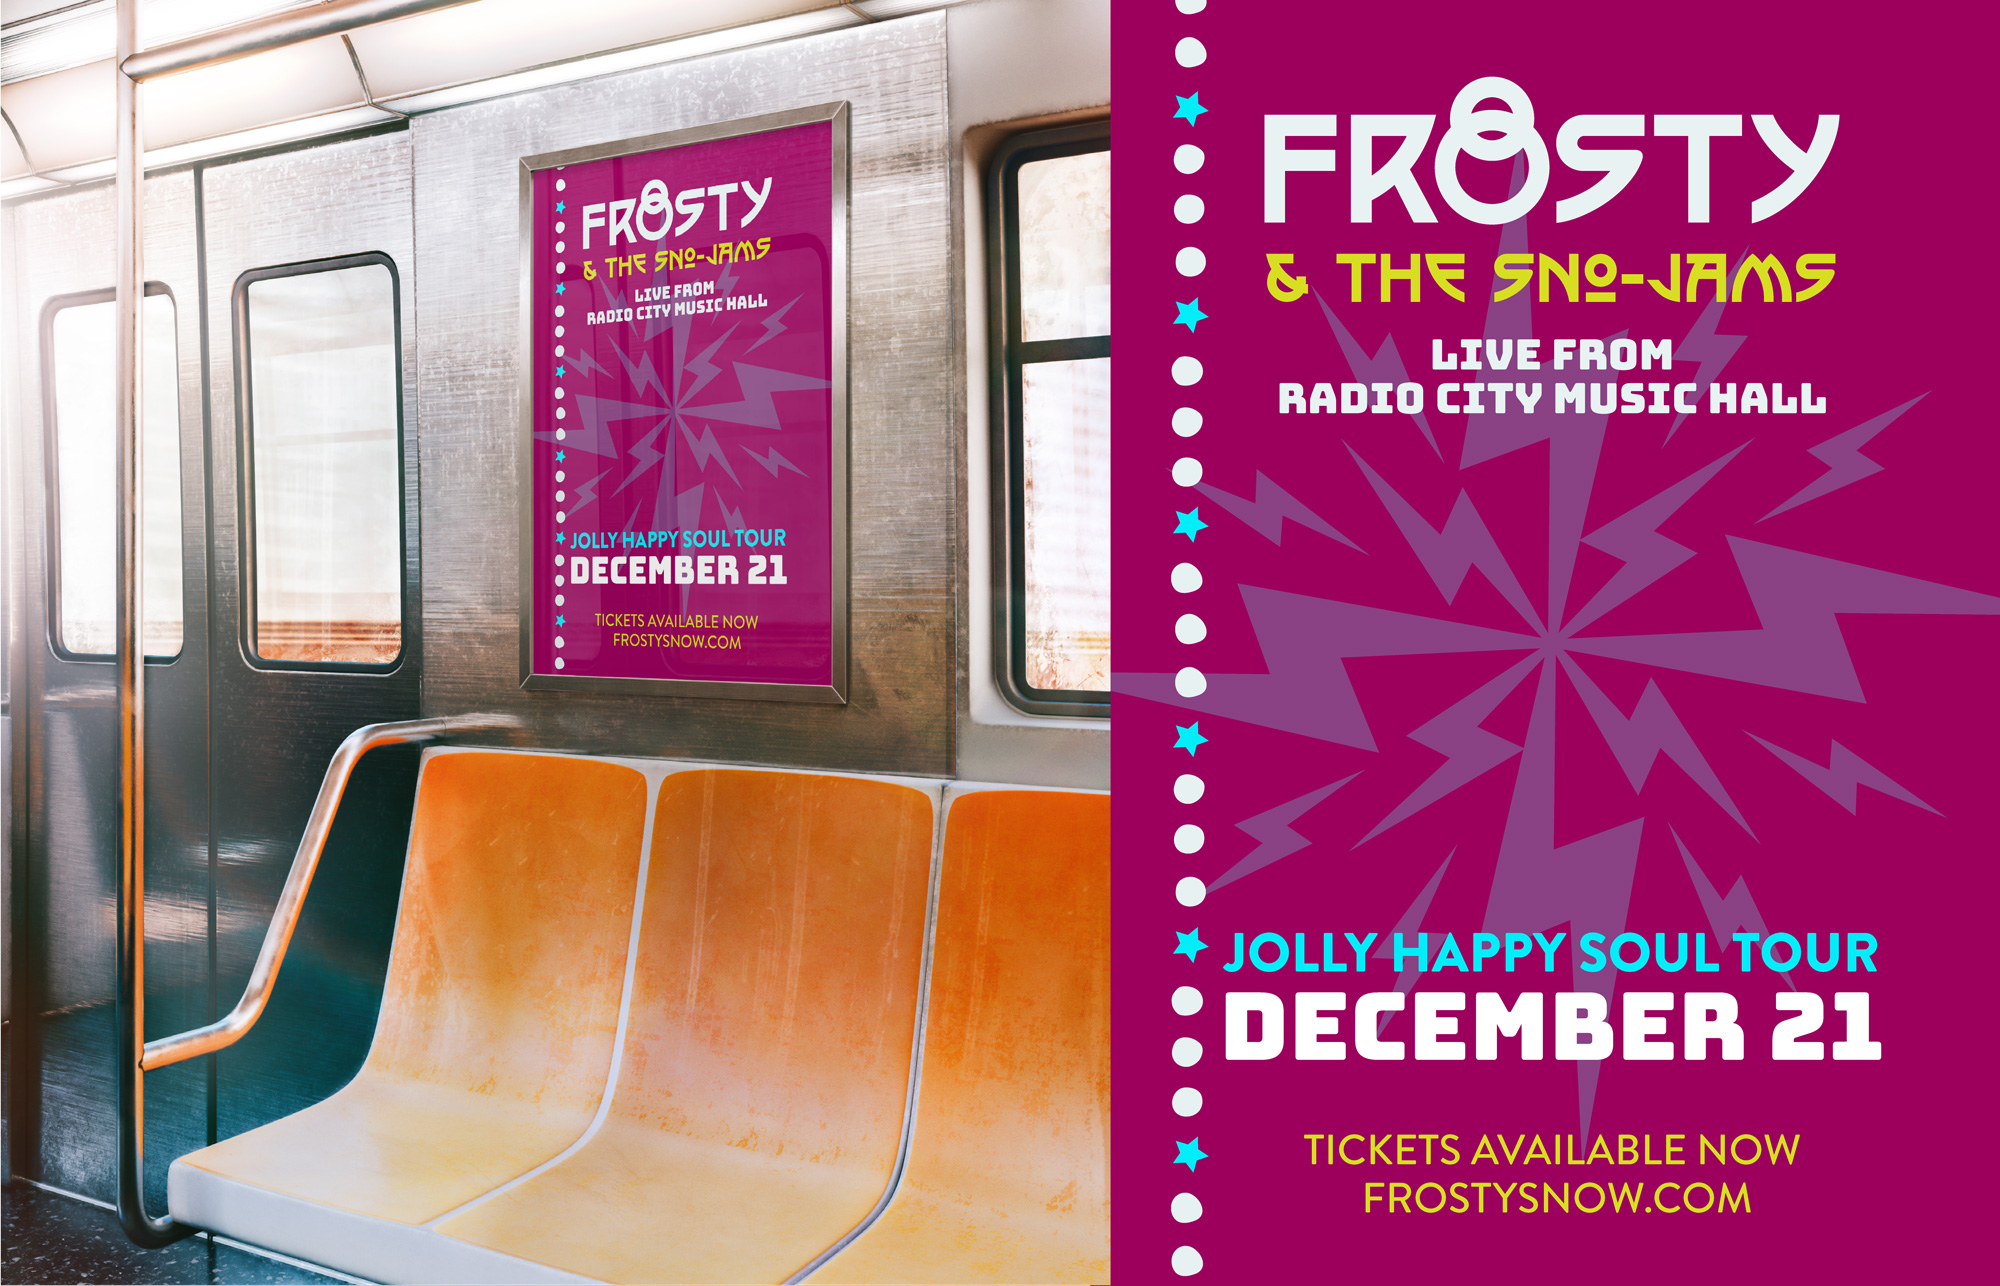 A deep magenta-colored poster advertising a Frosty and the Sno-Jams concert at Radio City Music Hall on December 21st is shown both in an NYC subway car and on its own